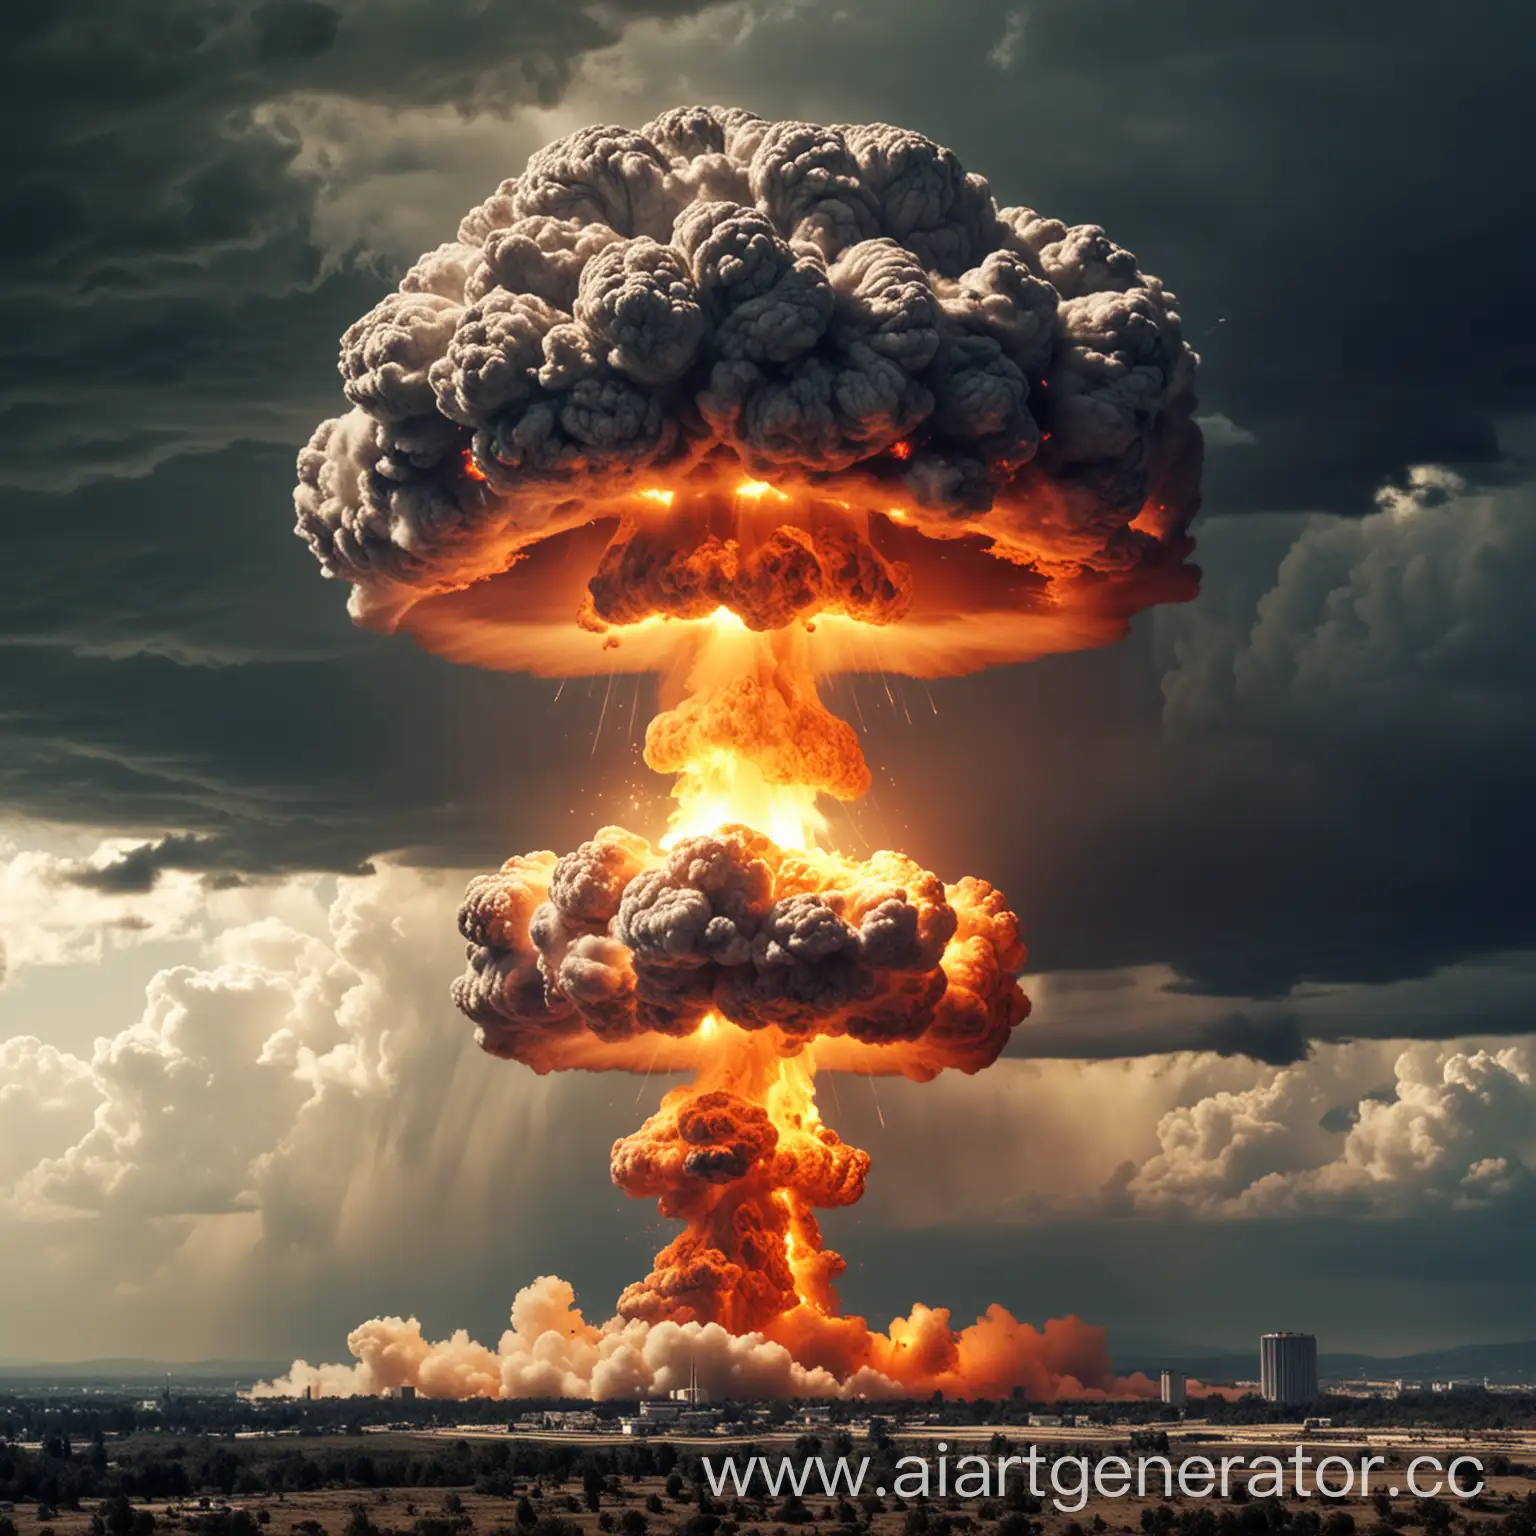 Dramatic-Nuclear-Explosion-Artwork-with-Fire-and-Smoke